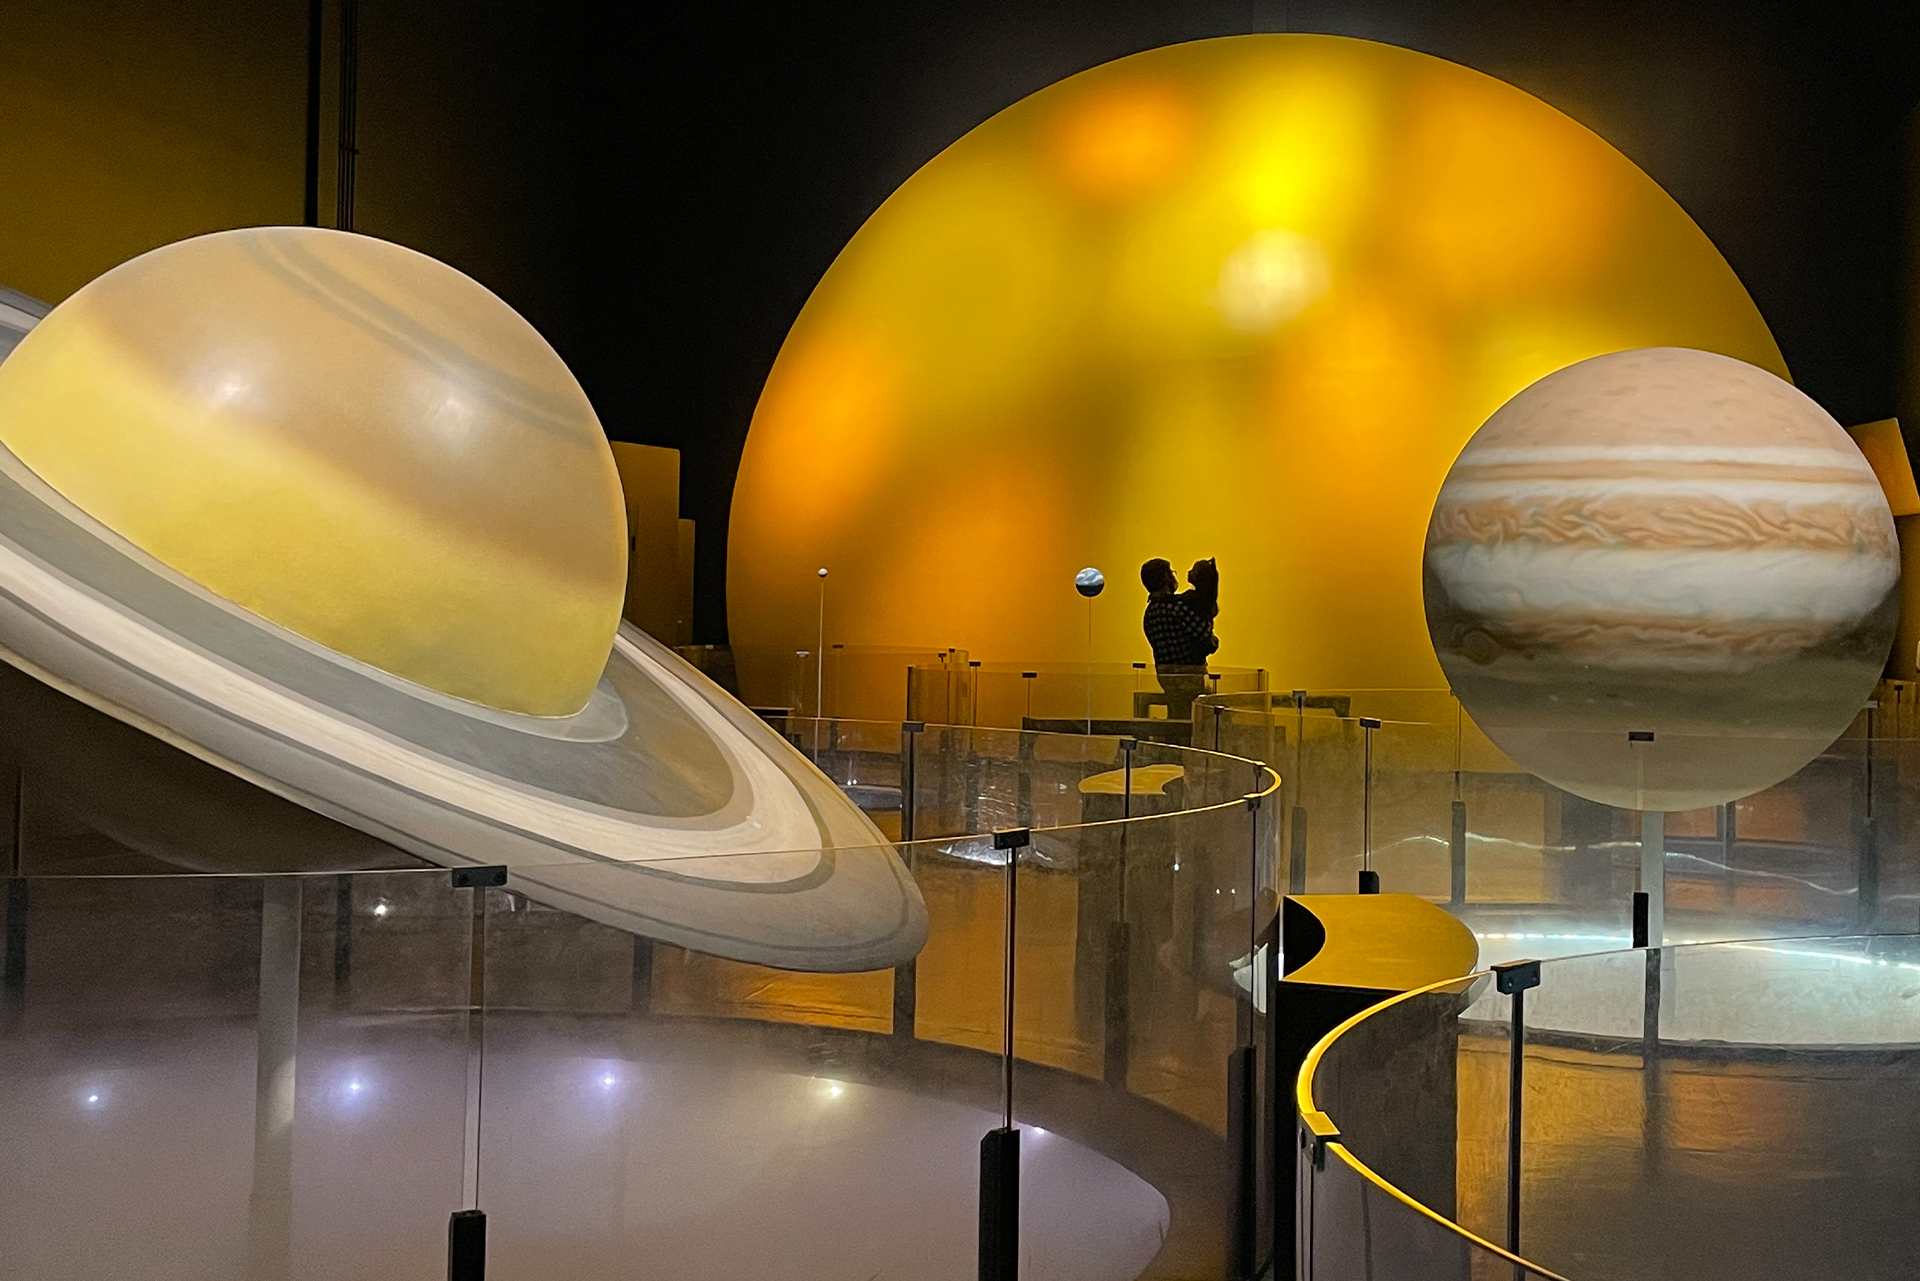 Planets and the sun displayed in the Cosmo dome